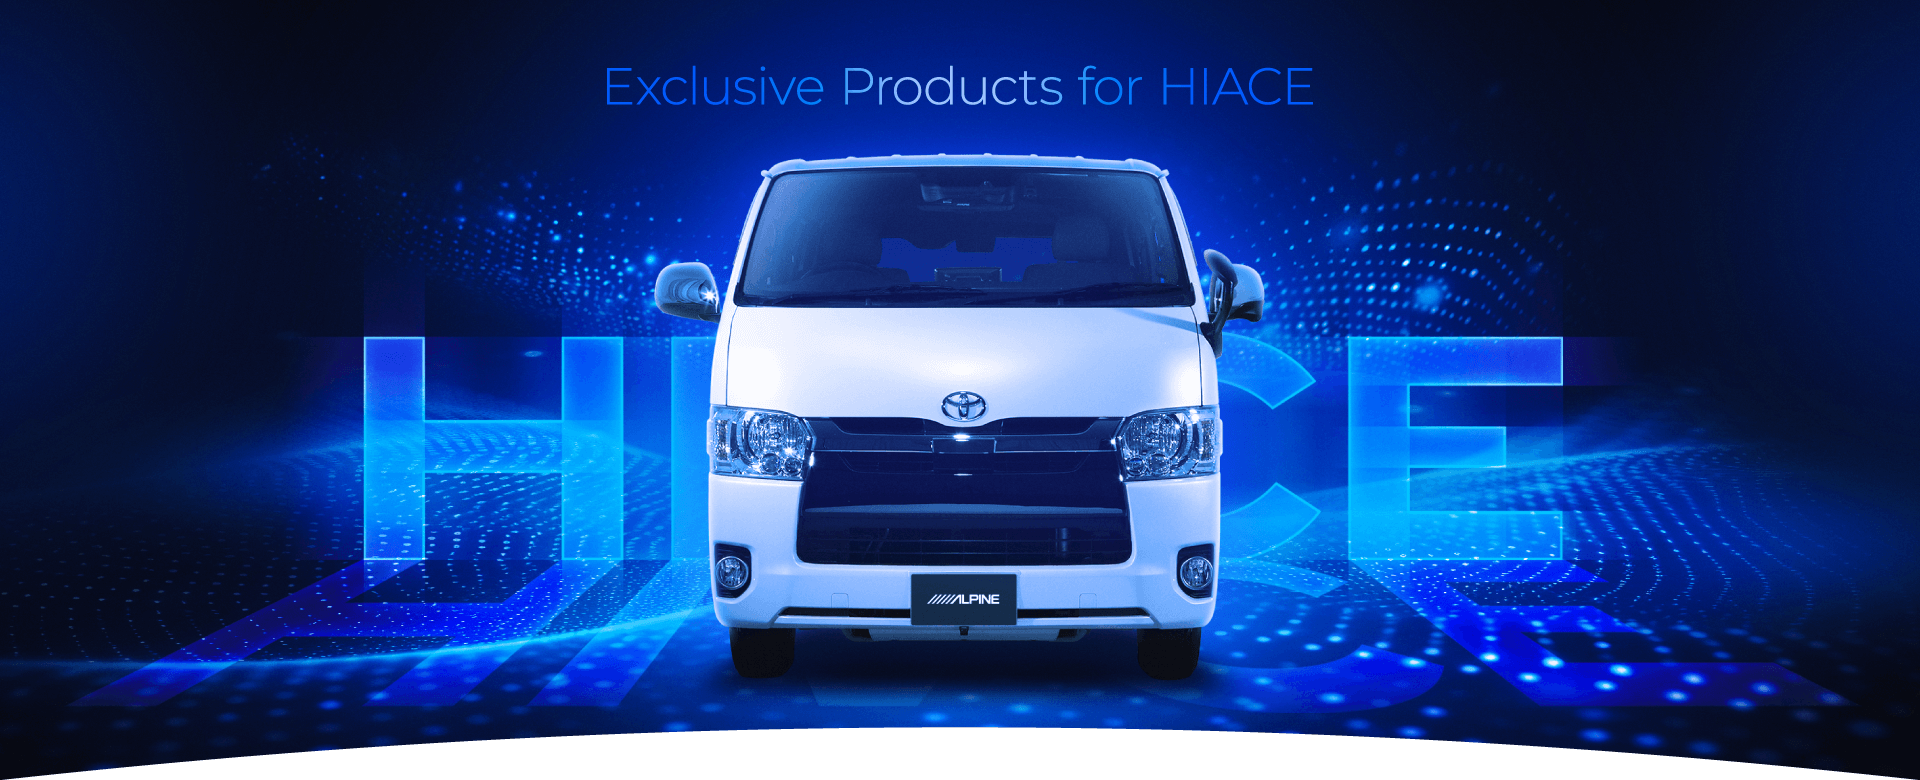 Exclusive Products for HIACE | アルパイン製品でハイエースをアップデート